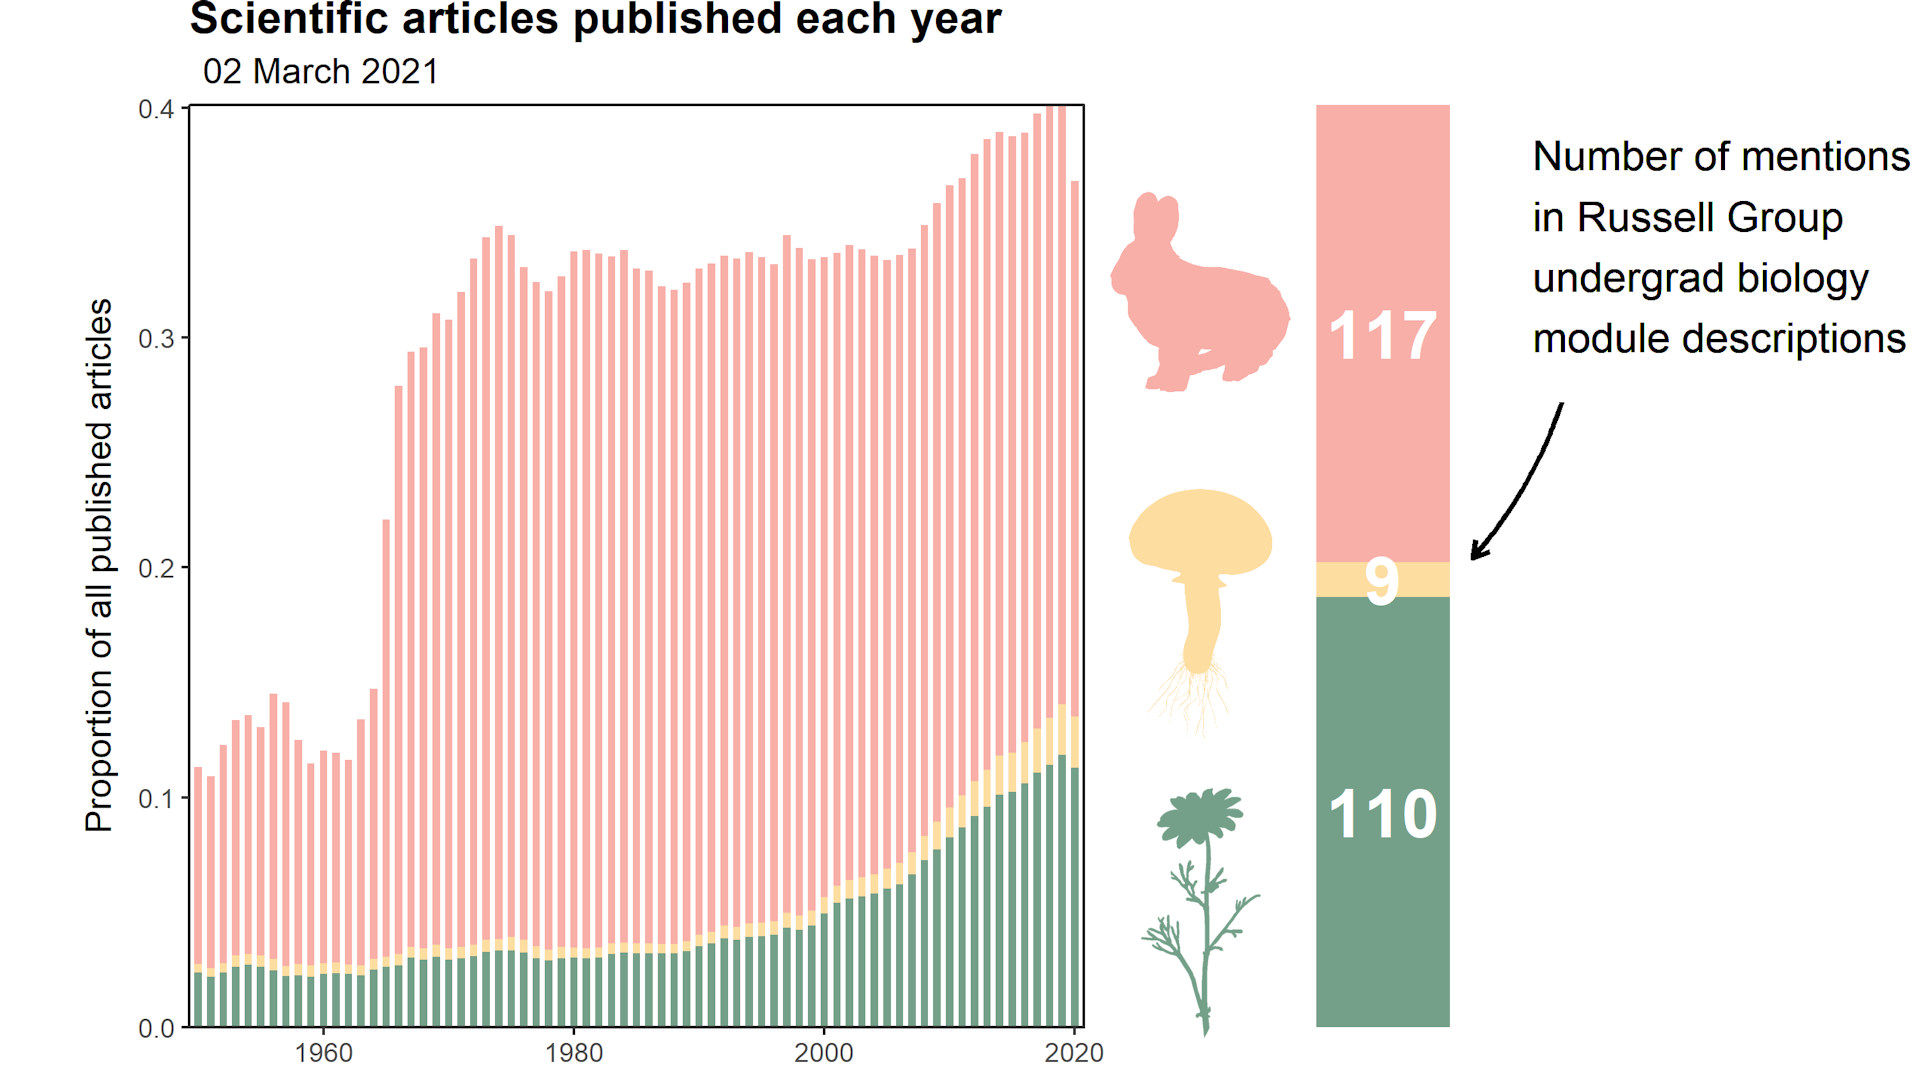 Bar graph of the number of scientific papers published each year on animals, fungi, and plants